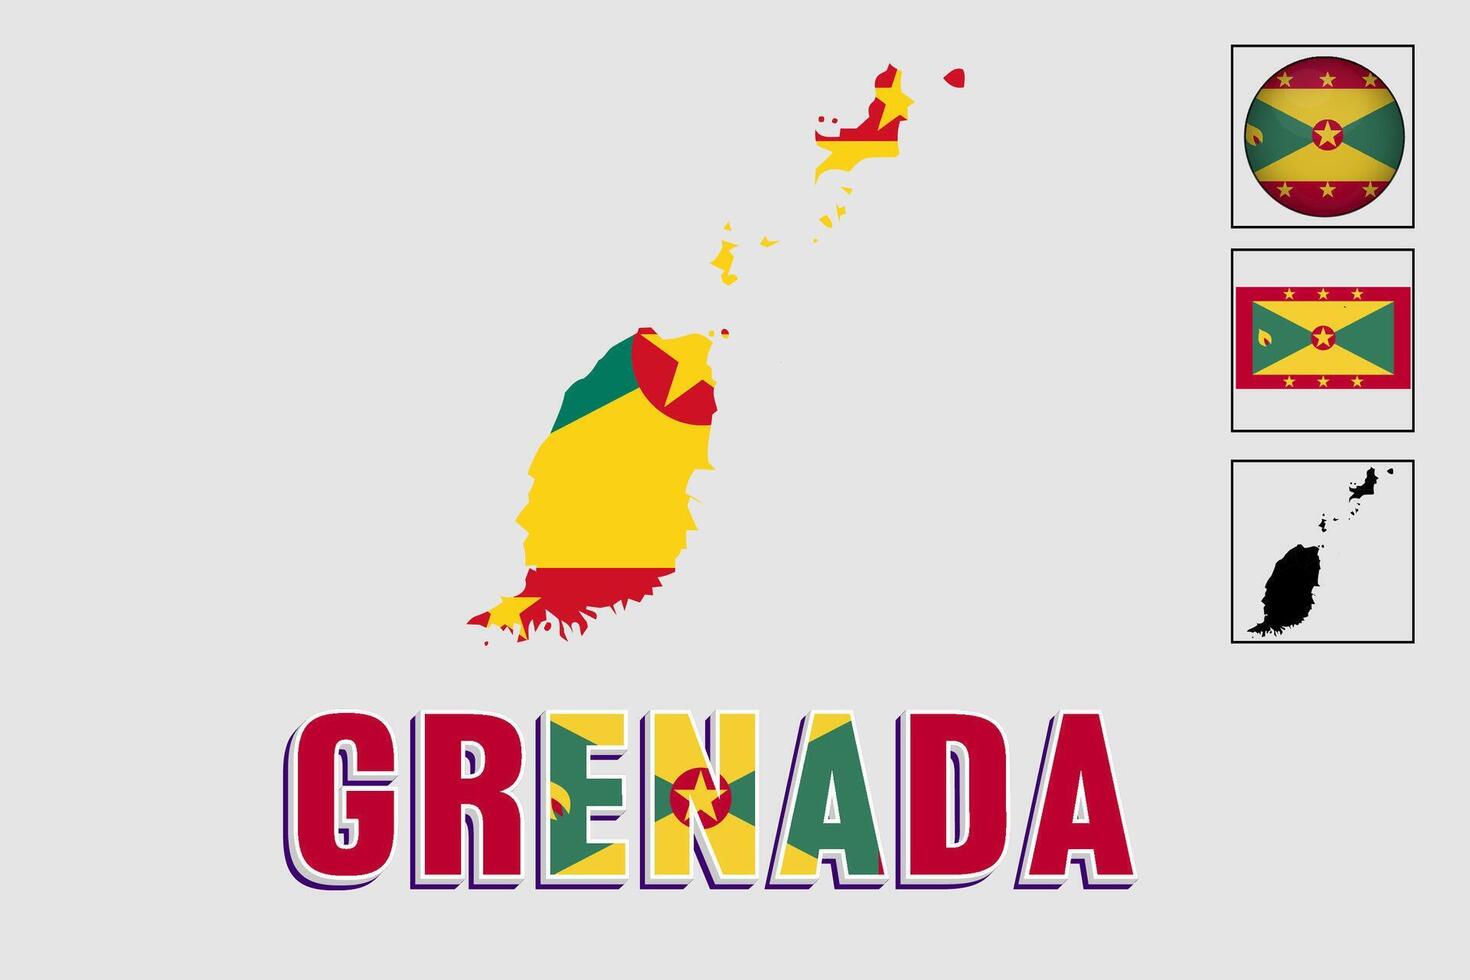 Grenada map and flag in vector illustration